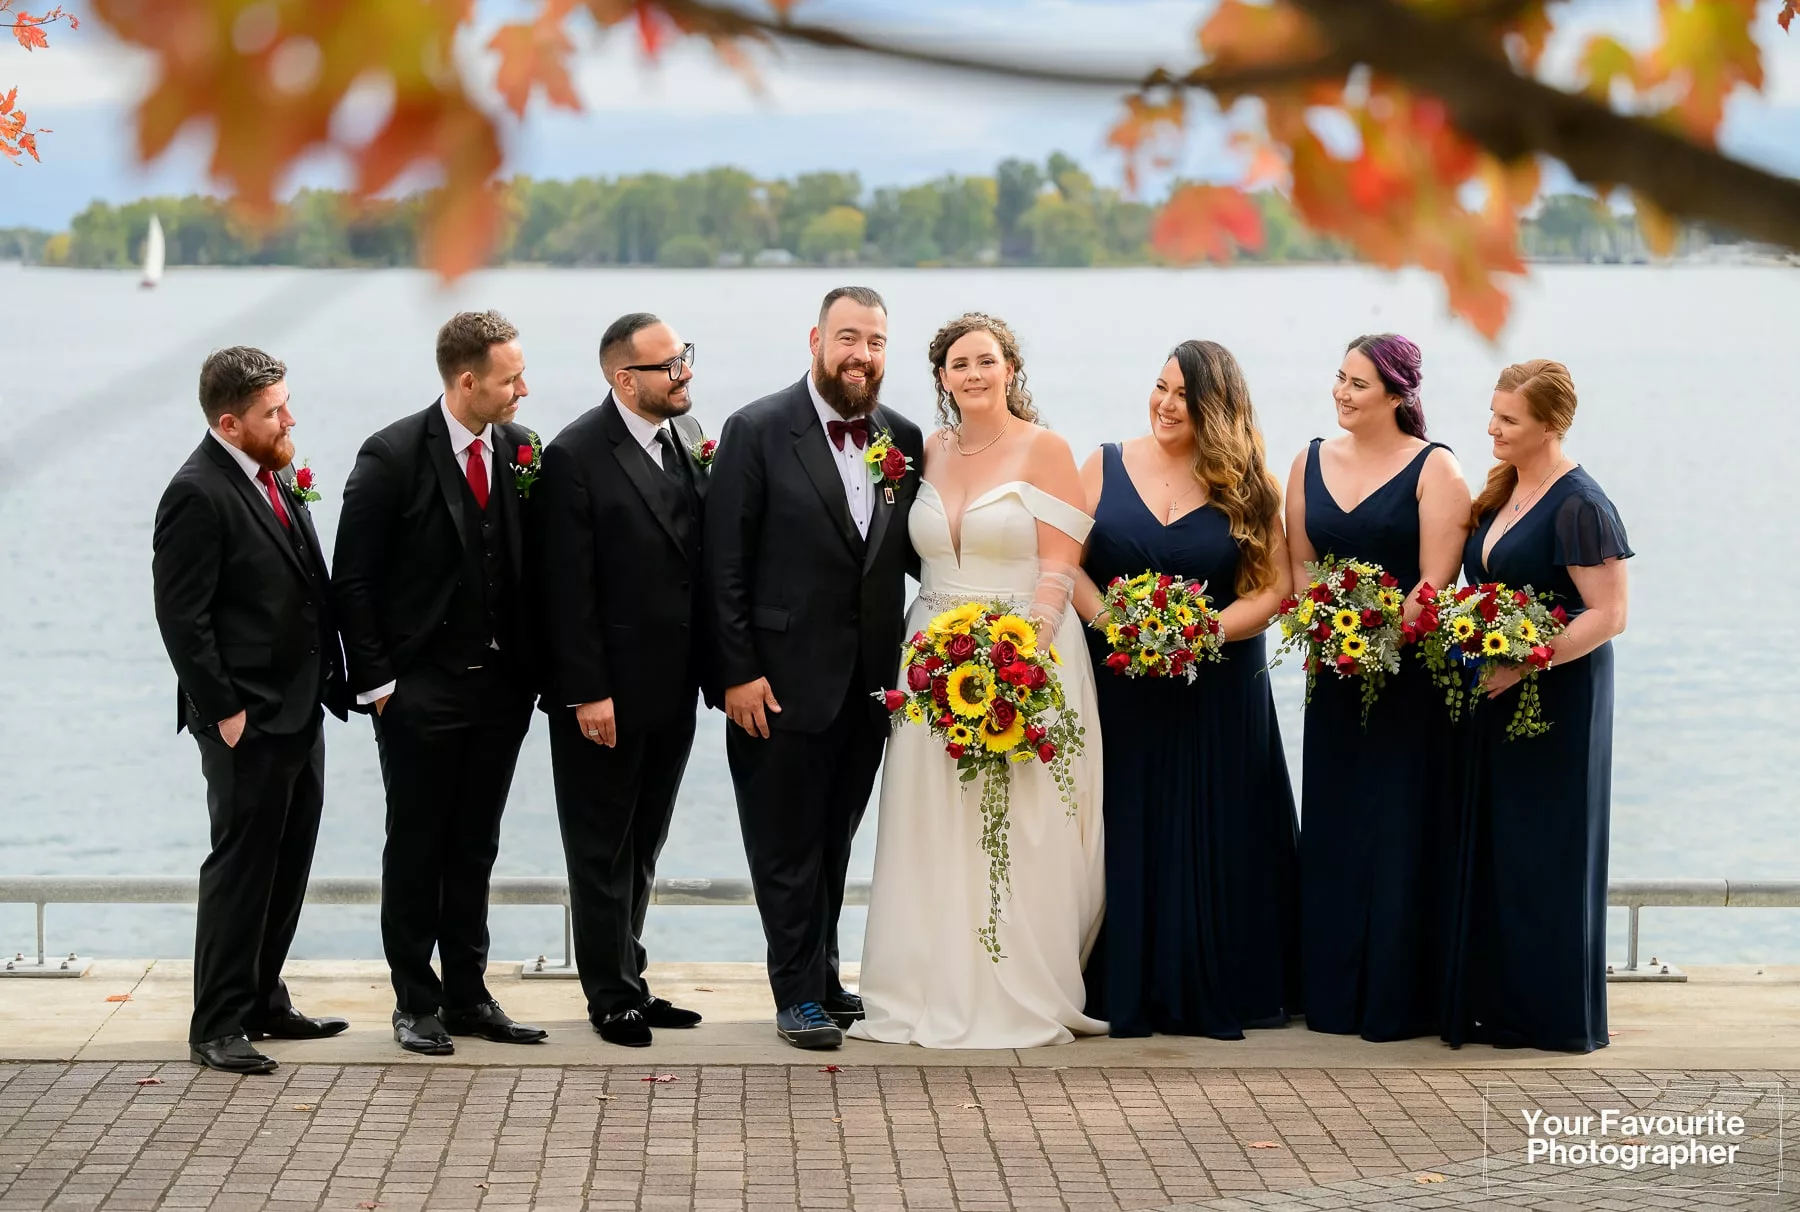 Wedding party posing in front of Lake Ontario and the Toronto Islands on the Water's Edge Promenade in downtown Toronto